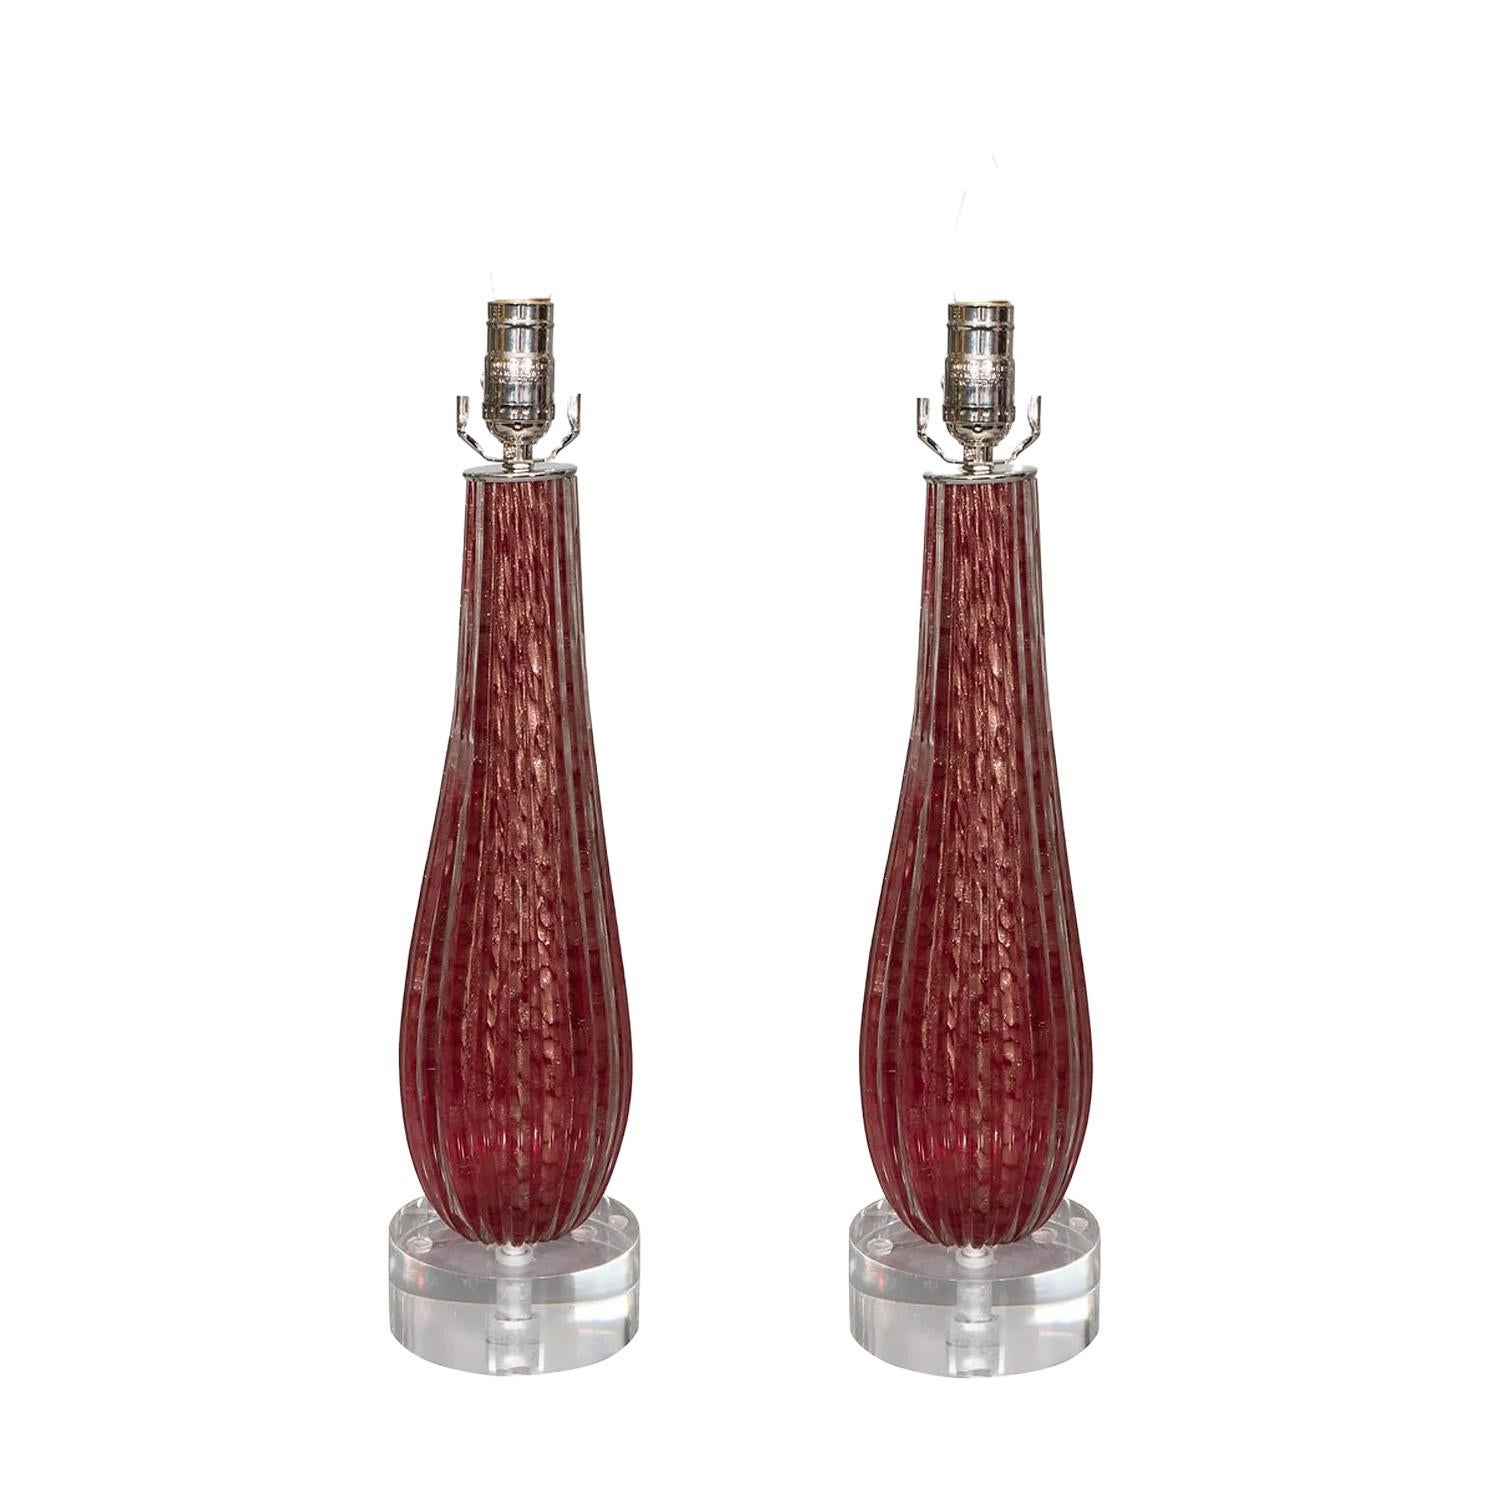 Pair of Murano ruby red rigadin glass lamps on acrylic bases. Italy, 1950's
Lamp shades are not included.